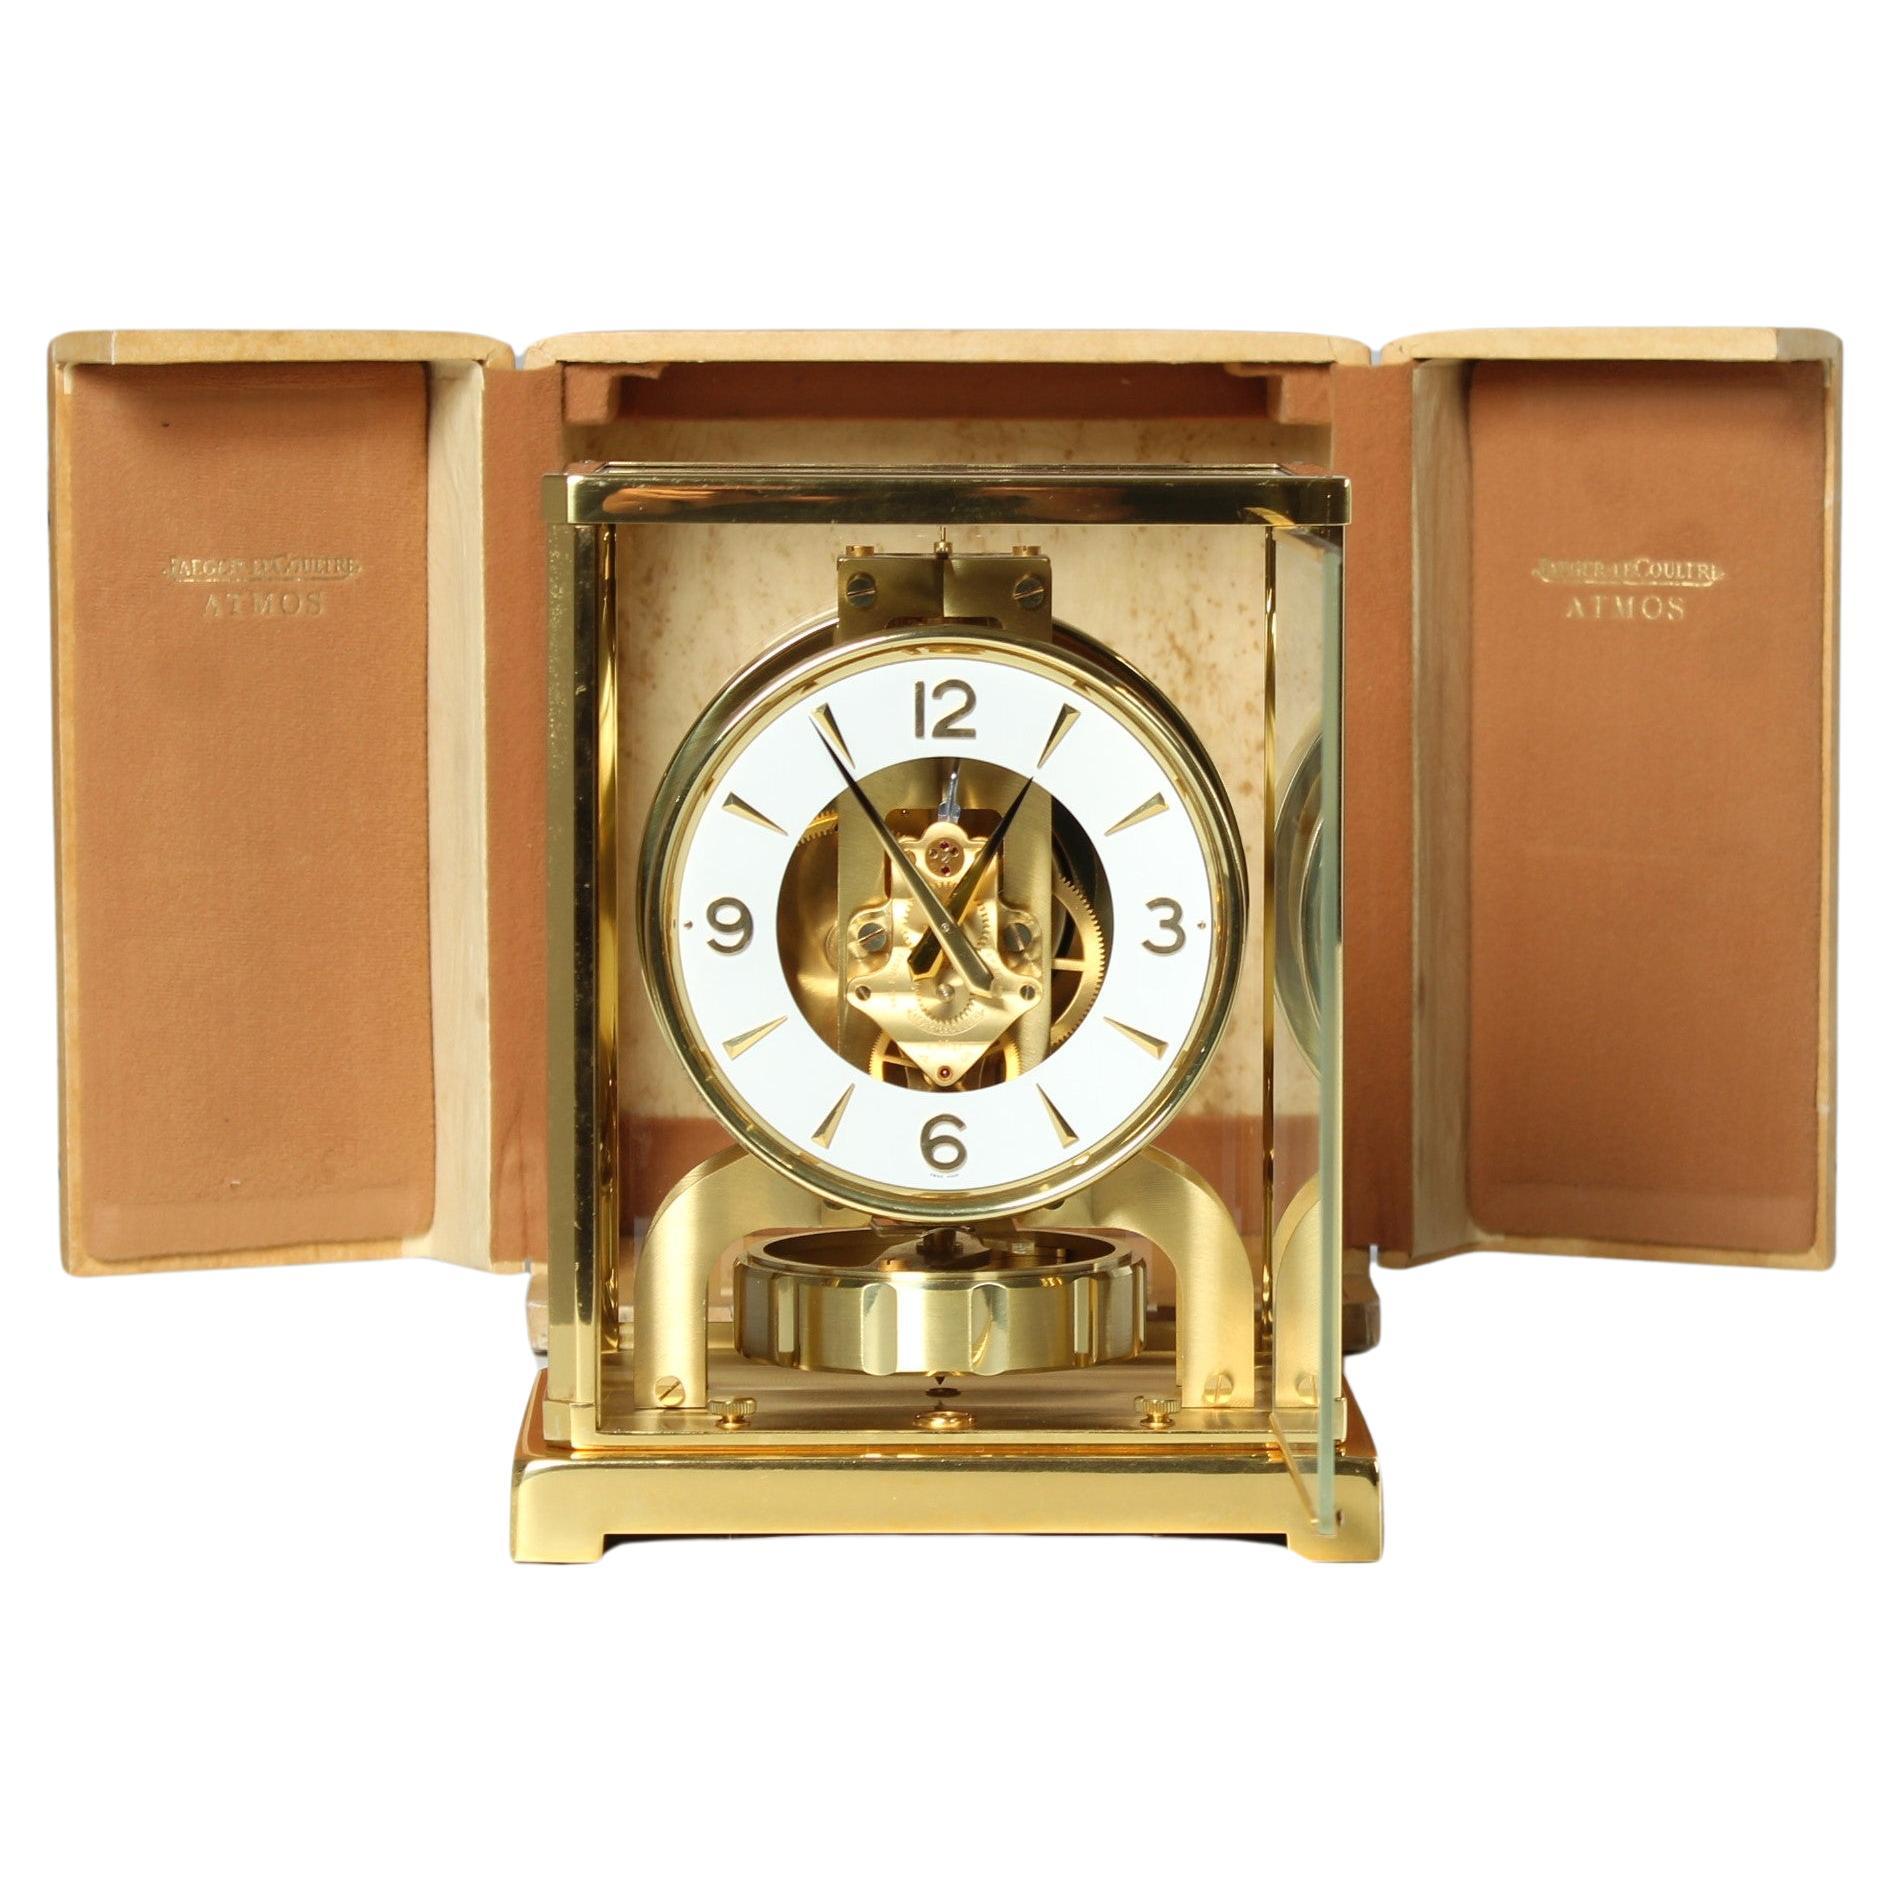 Jaeger LeCoultre, Atmos Clock with Original Box, Swiss Made in 1965